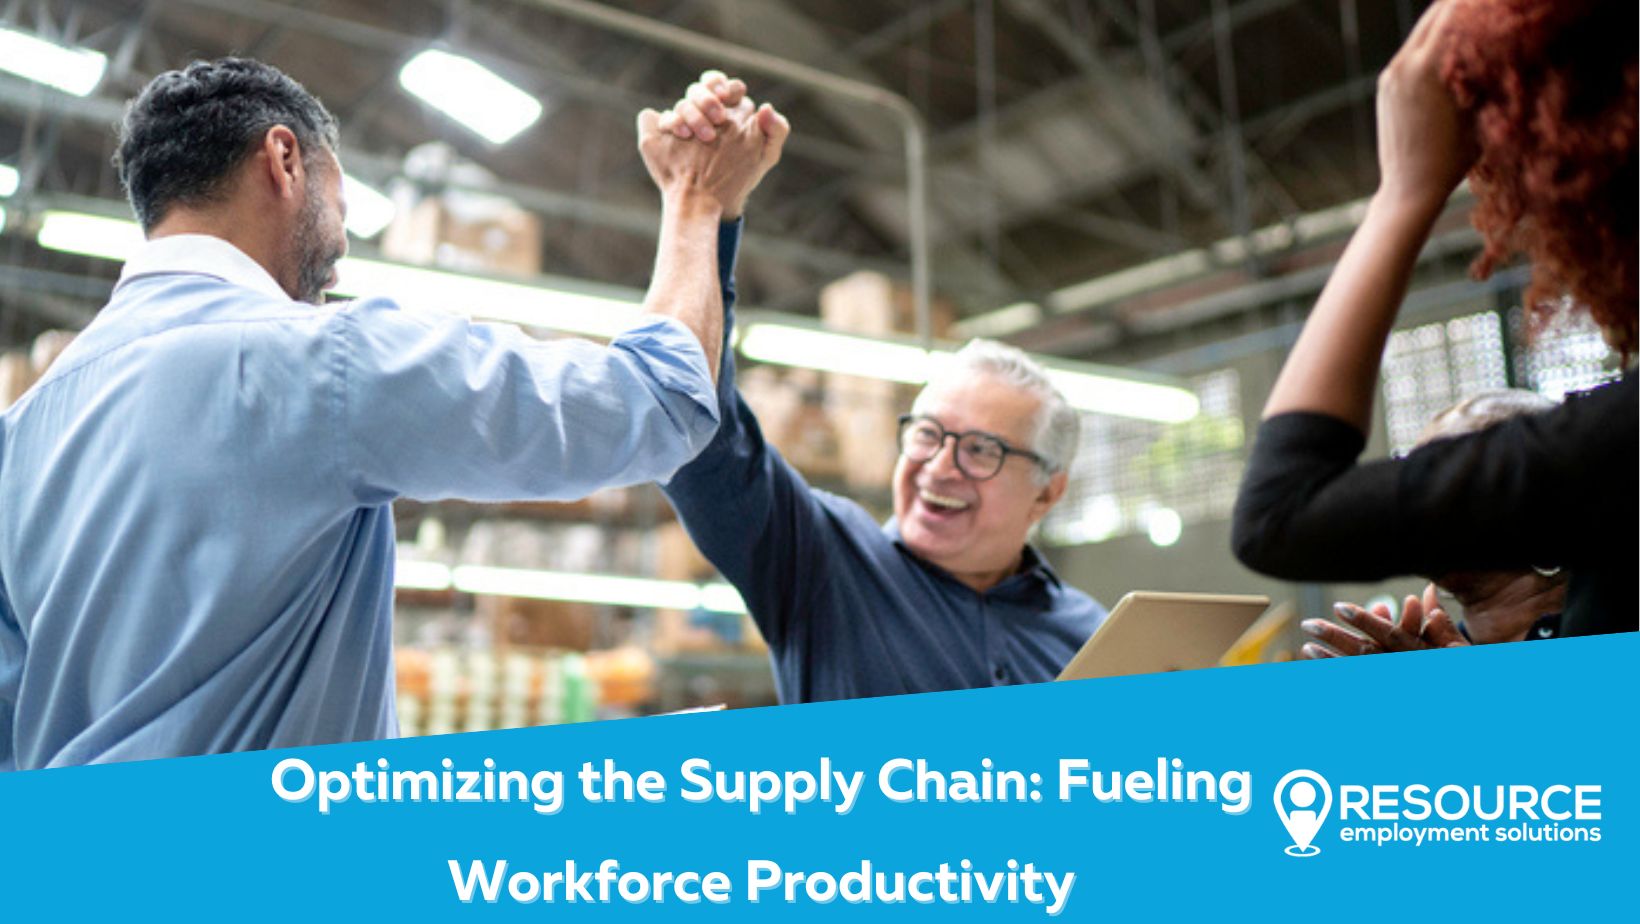 Optimizing the Supply Chain: Fueling Workforce Productivity